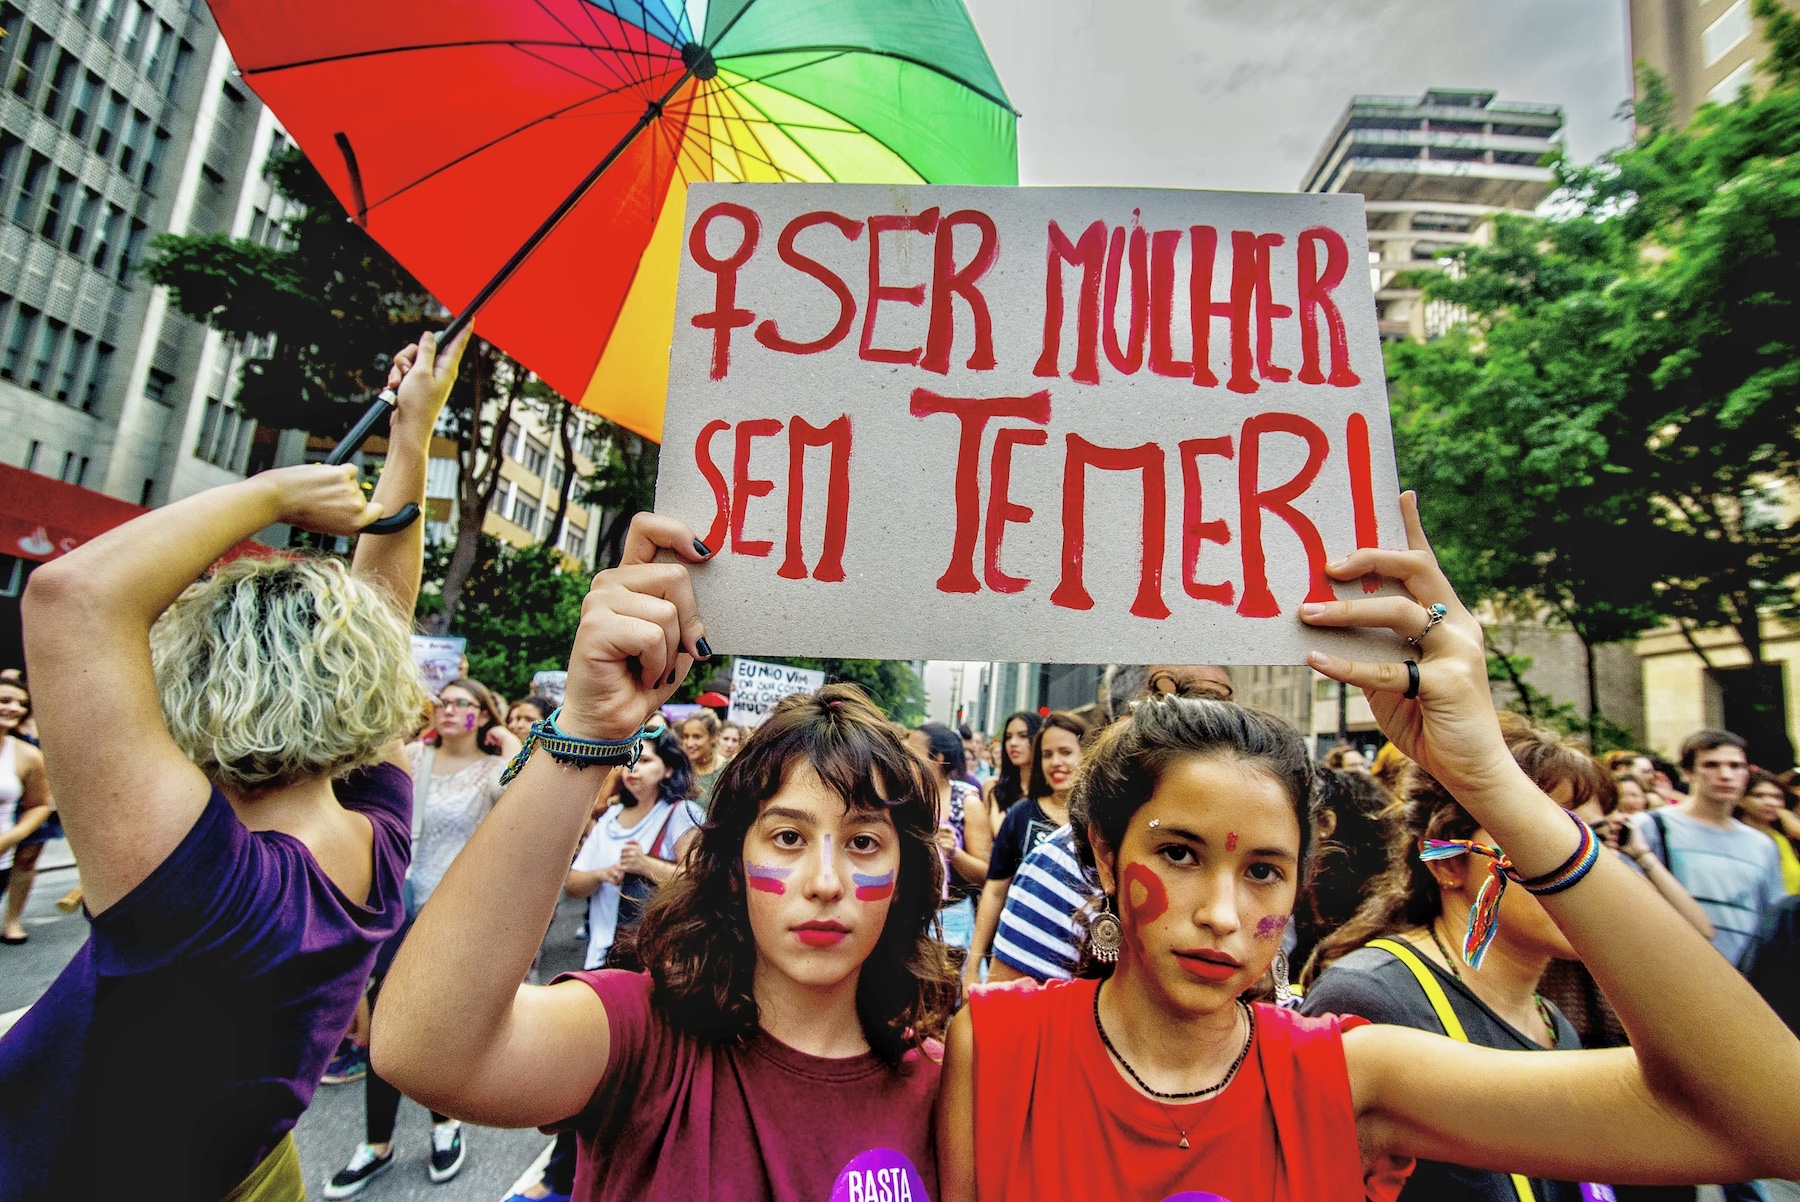 A protest sign is held by two women during a march in Brazil. A rainbow umbrella is held up behind them.